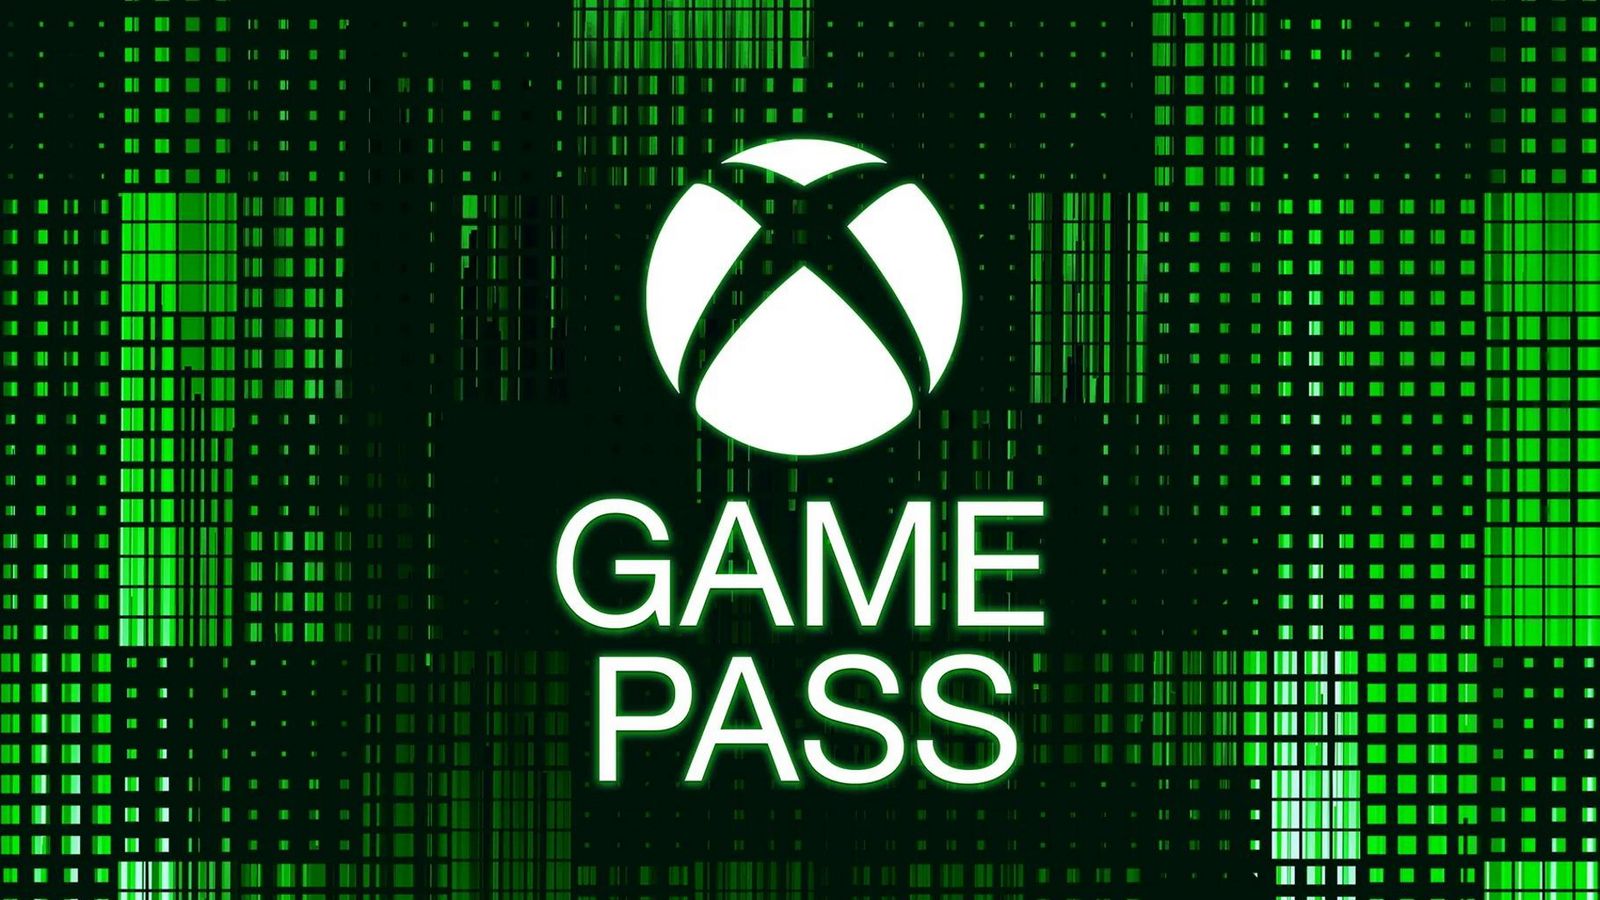 A promotional image for Xbox Game Pass. The Xbox logo on a green checkered background.